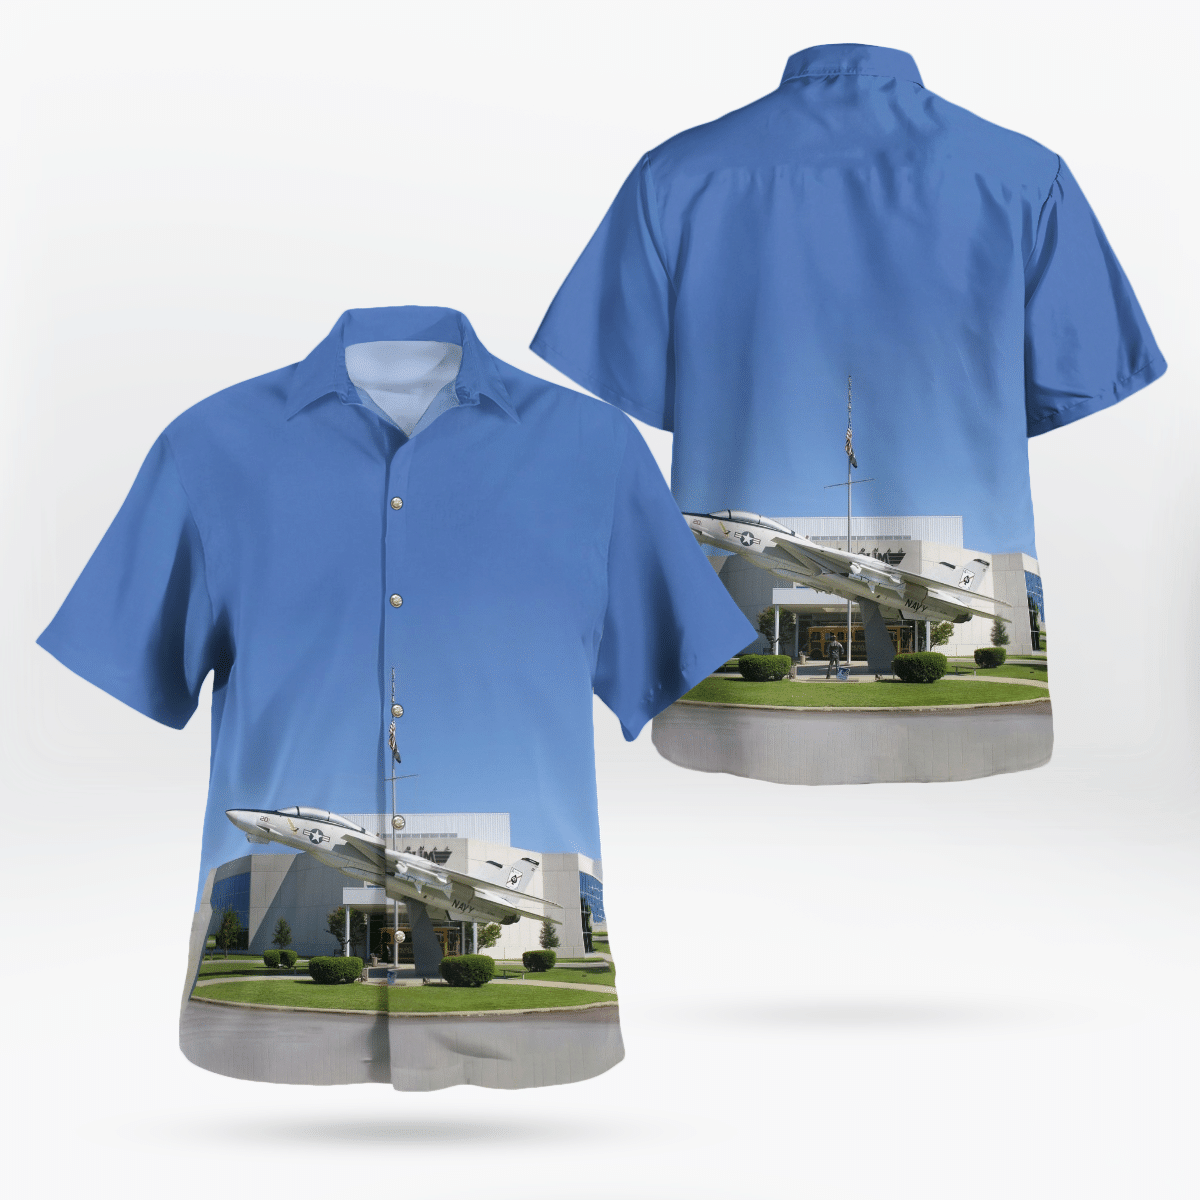 Shop now to find the perfect Hawaii Shirt for your hobby 149